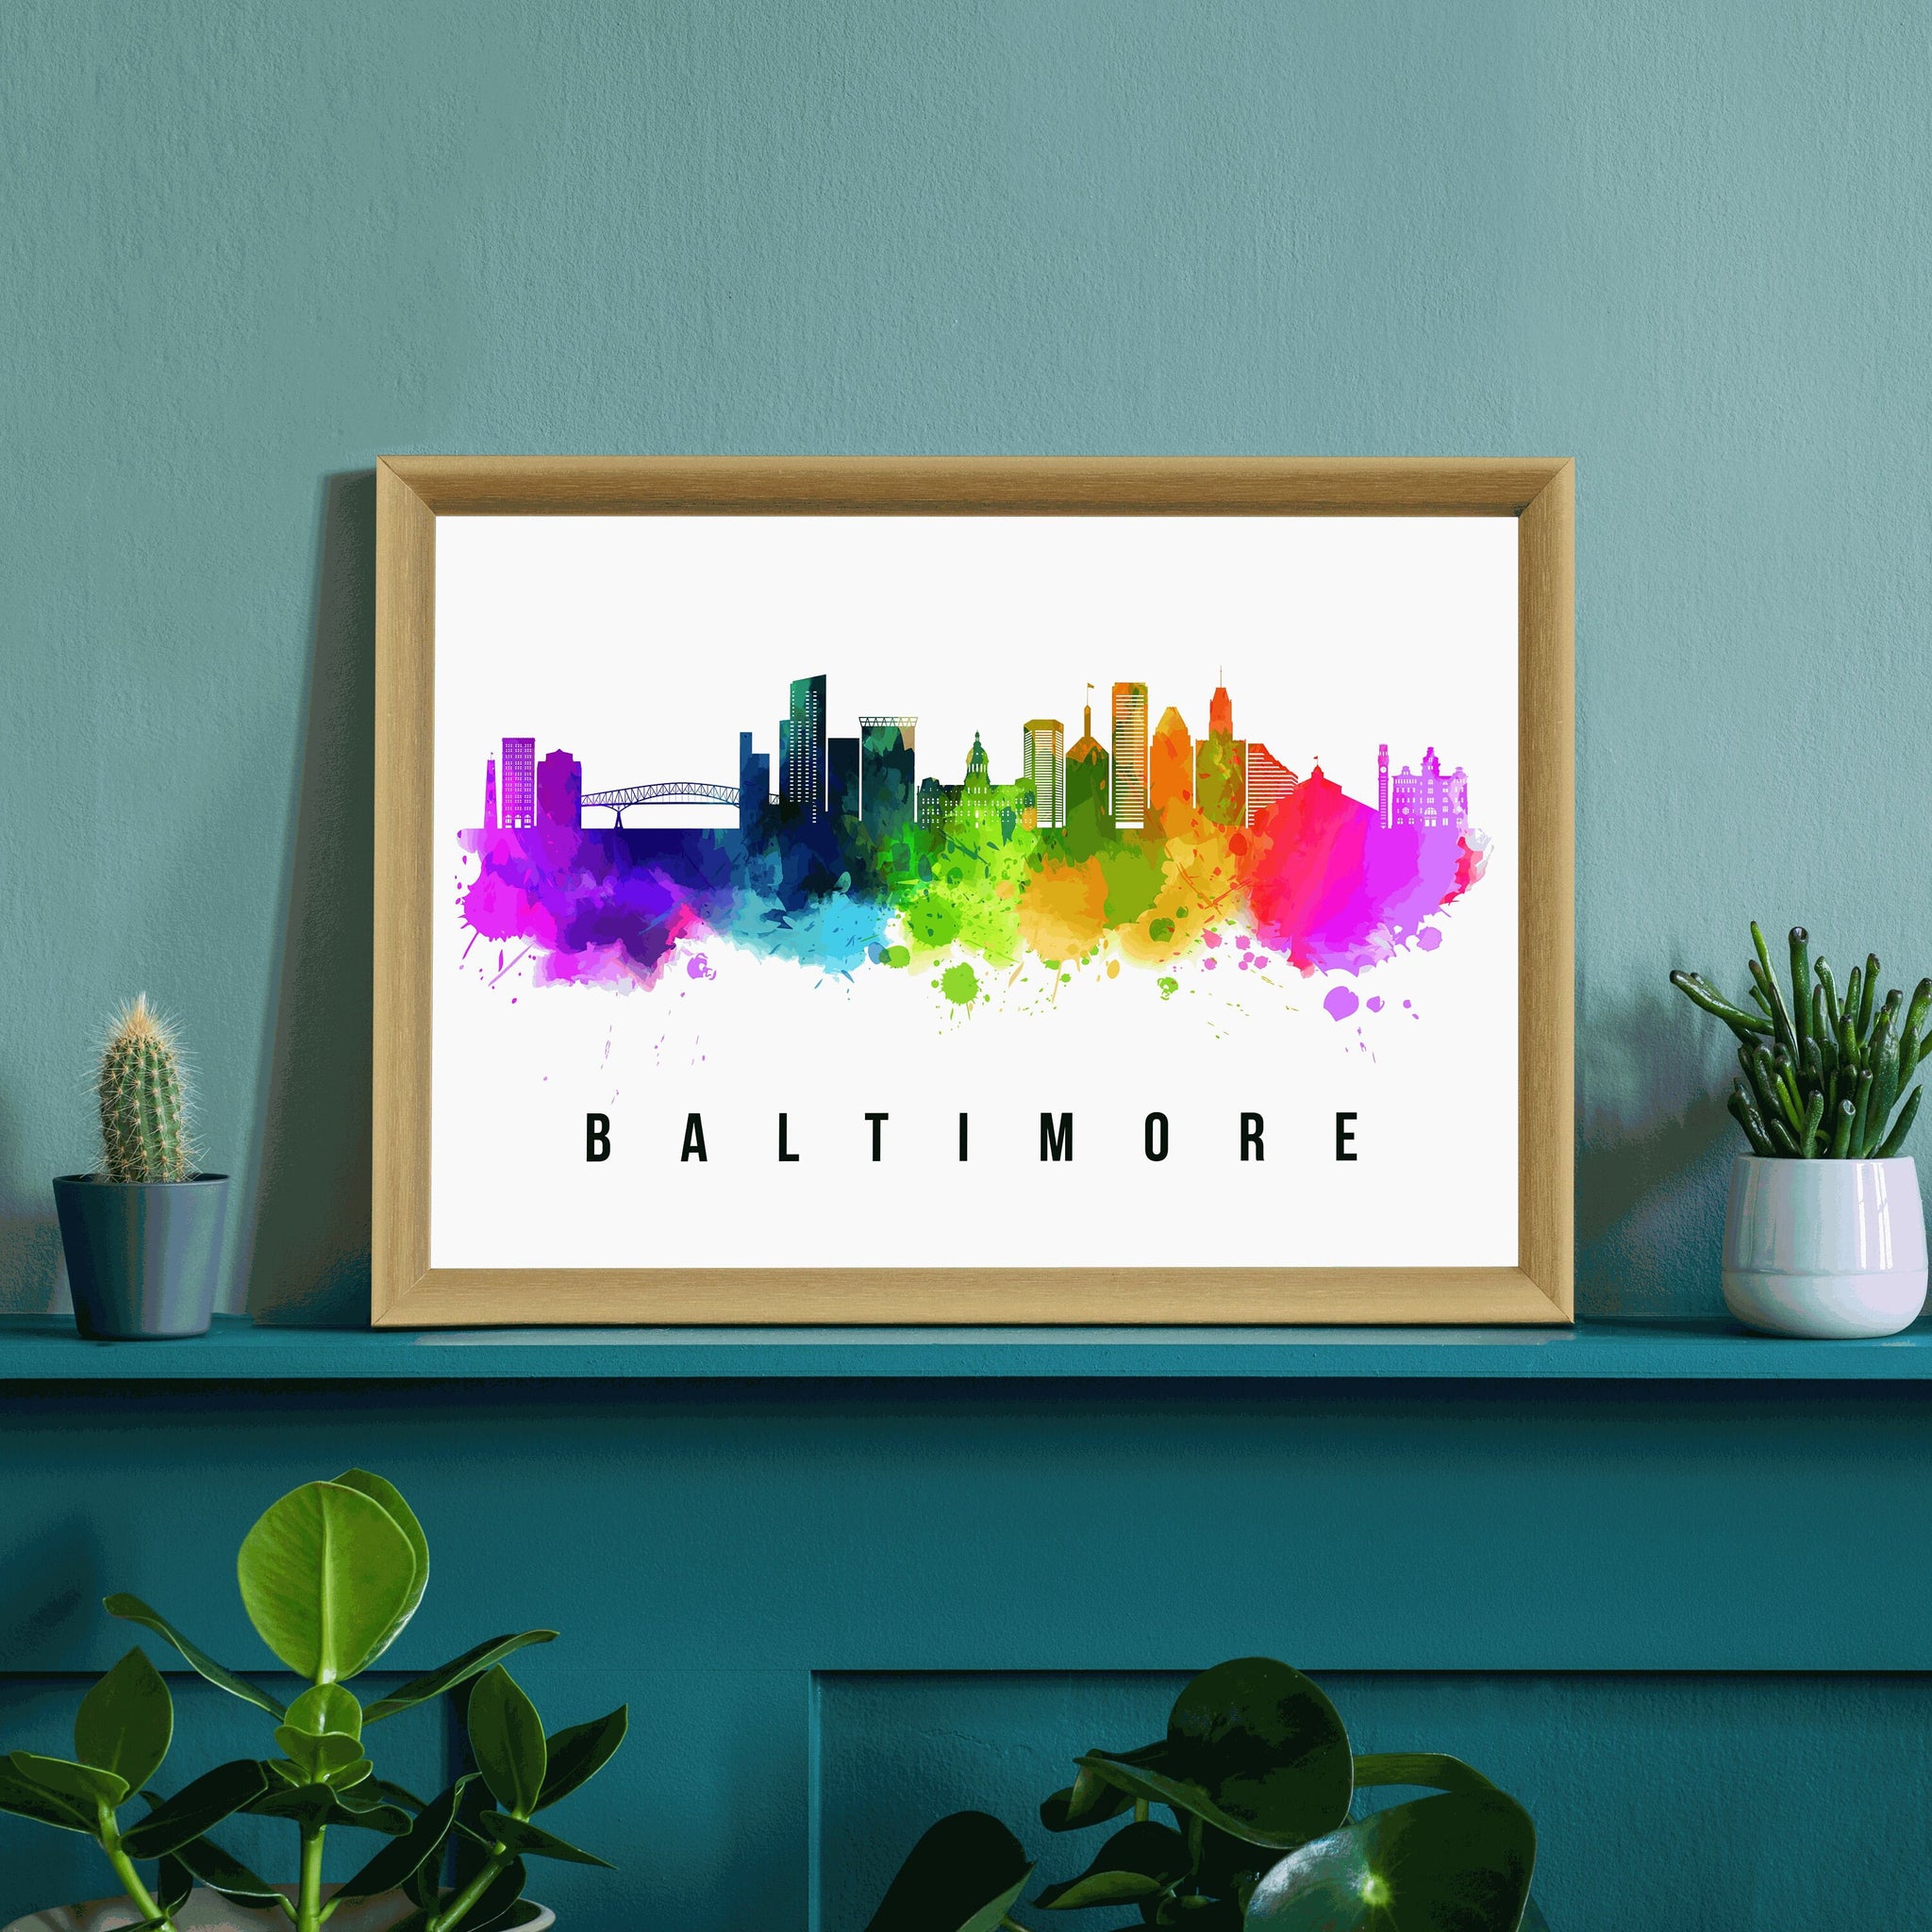 Baltimore - Maryland Skyline Poster, Cityscape Painting, Baltimore Poster, Baltimore Cityscape and Landmark Print, Home and Office Wall Art